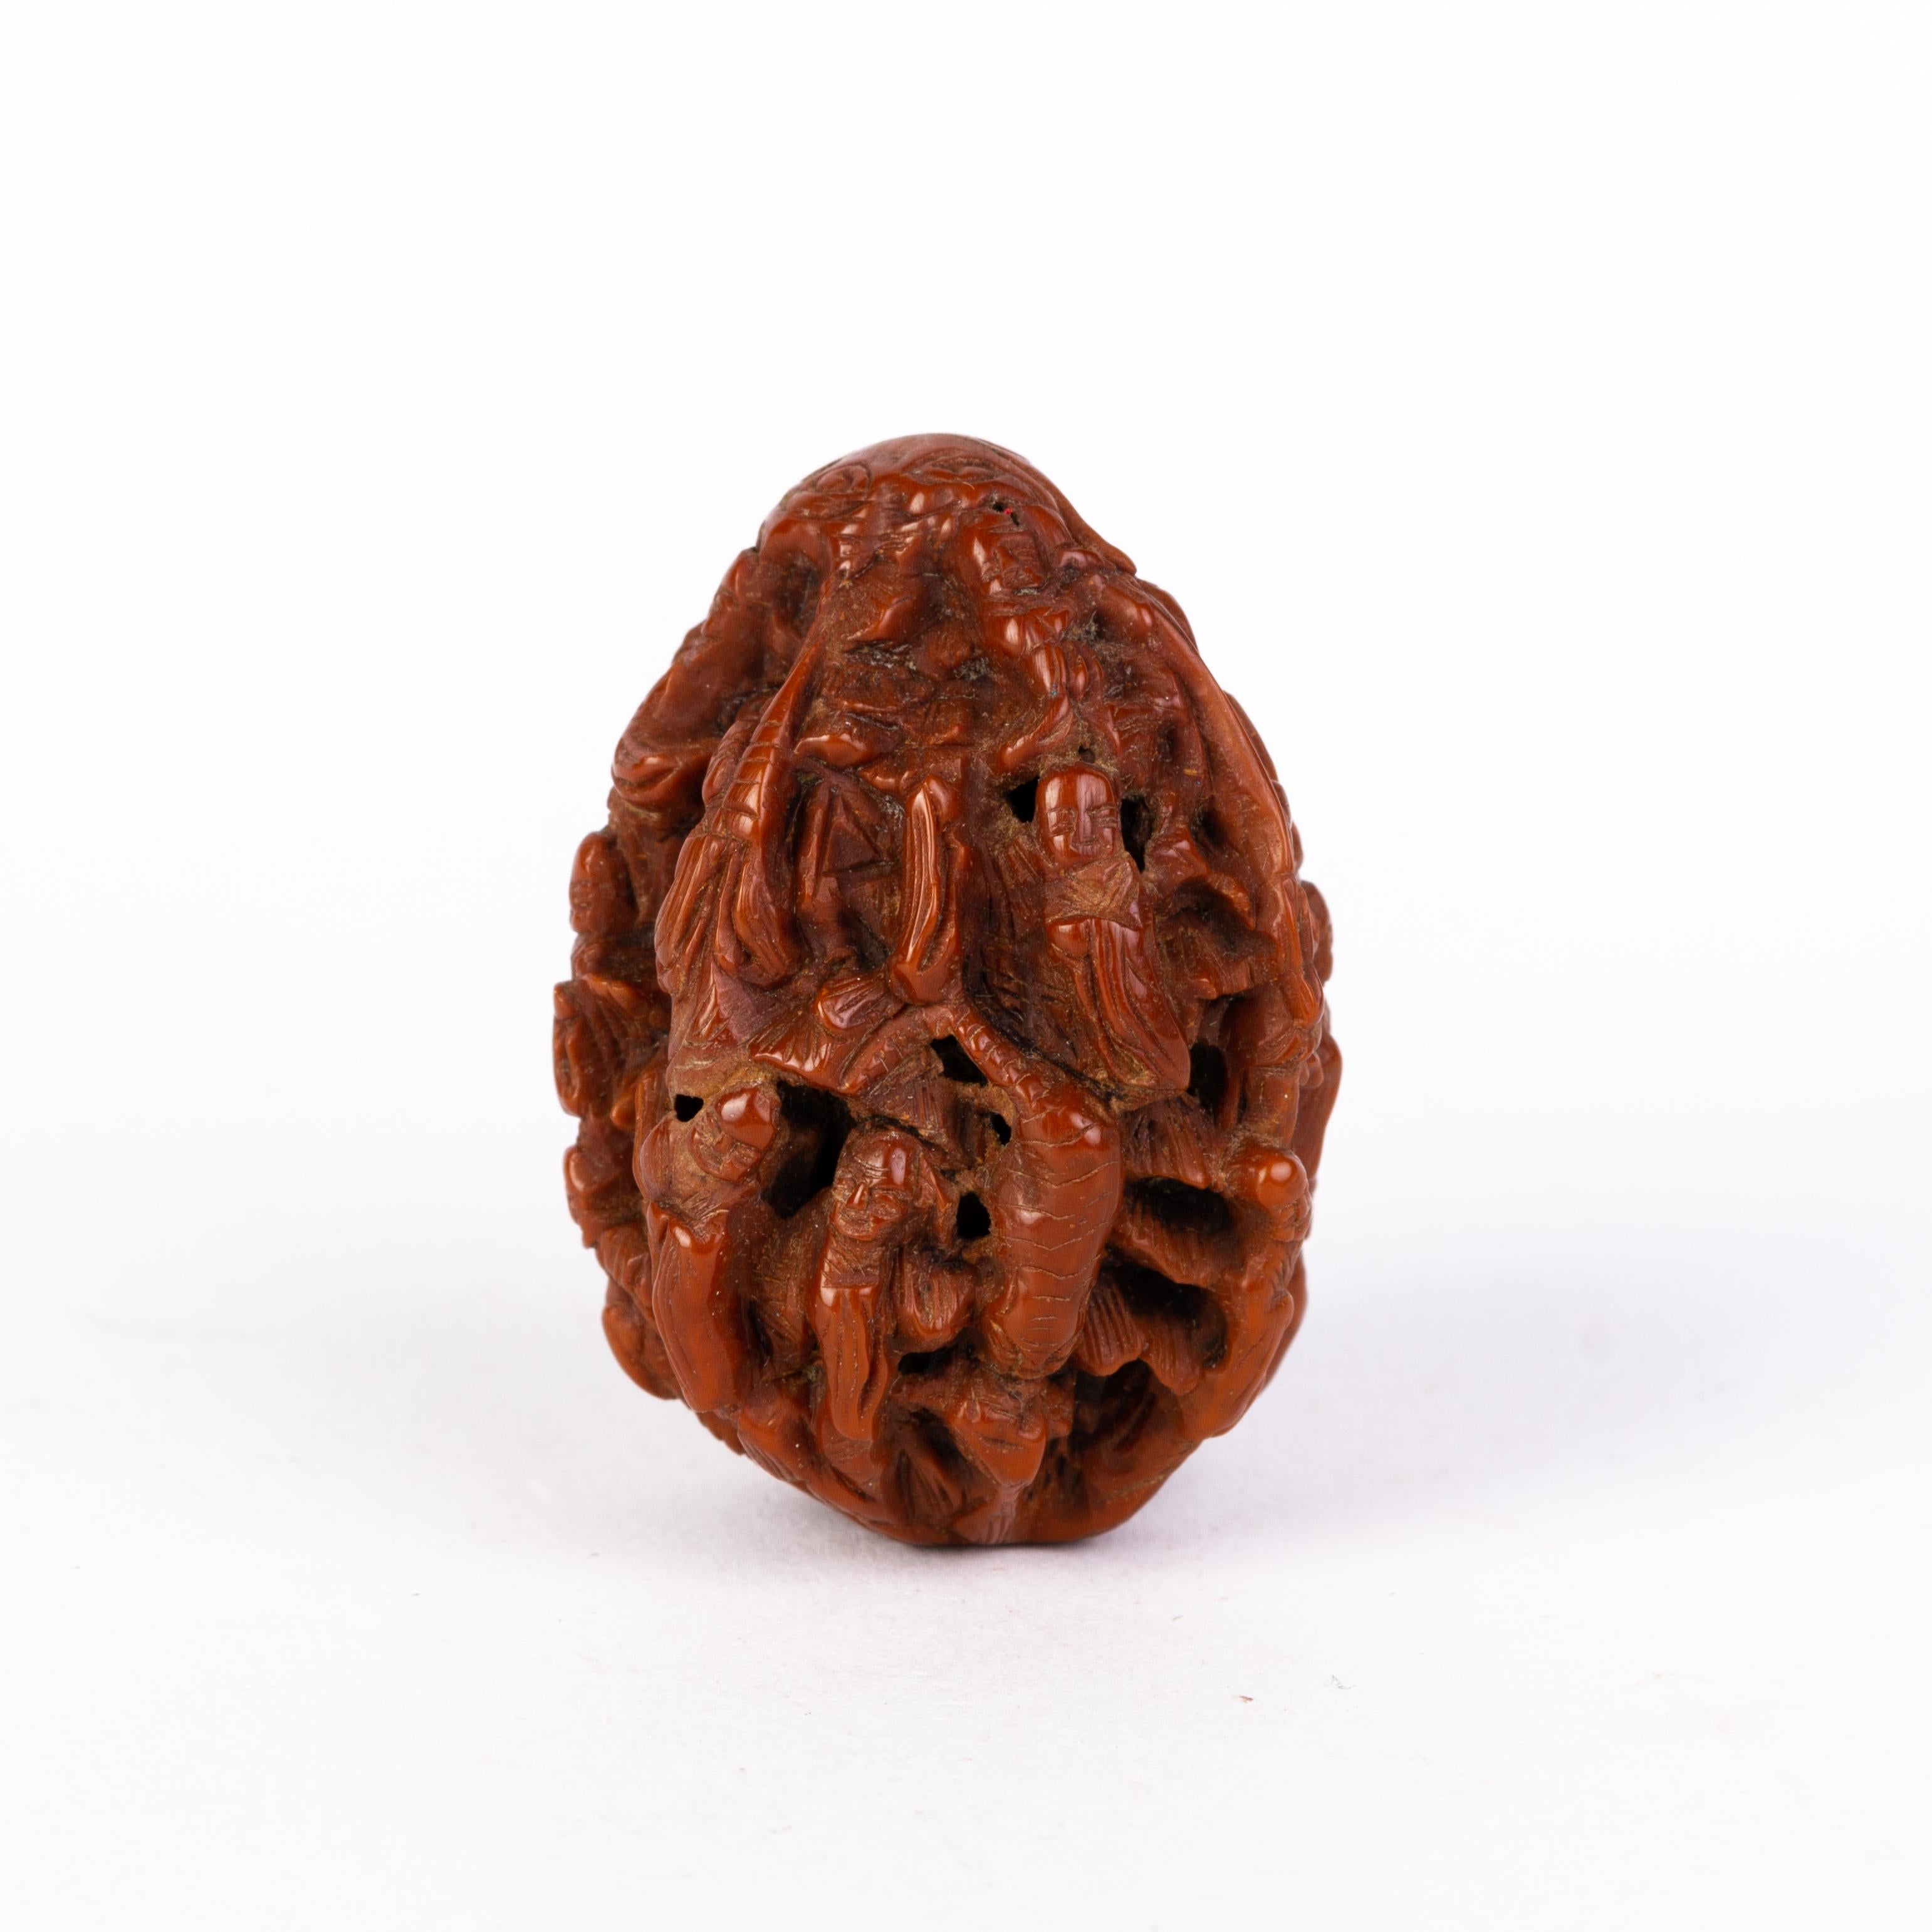 Japanese Carved boxwood Netsuke Inro Ojime
Good condition
From a private collection.
Free international shipping.